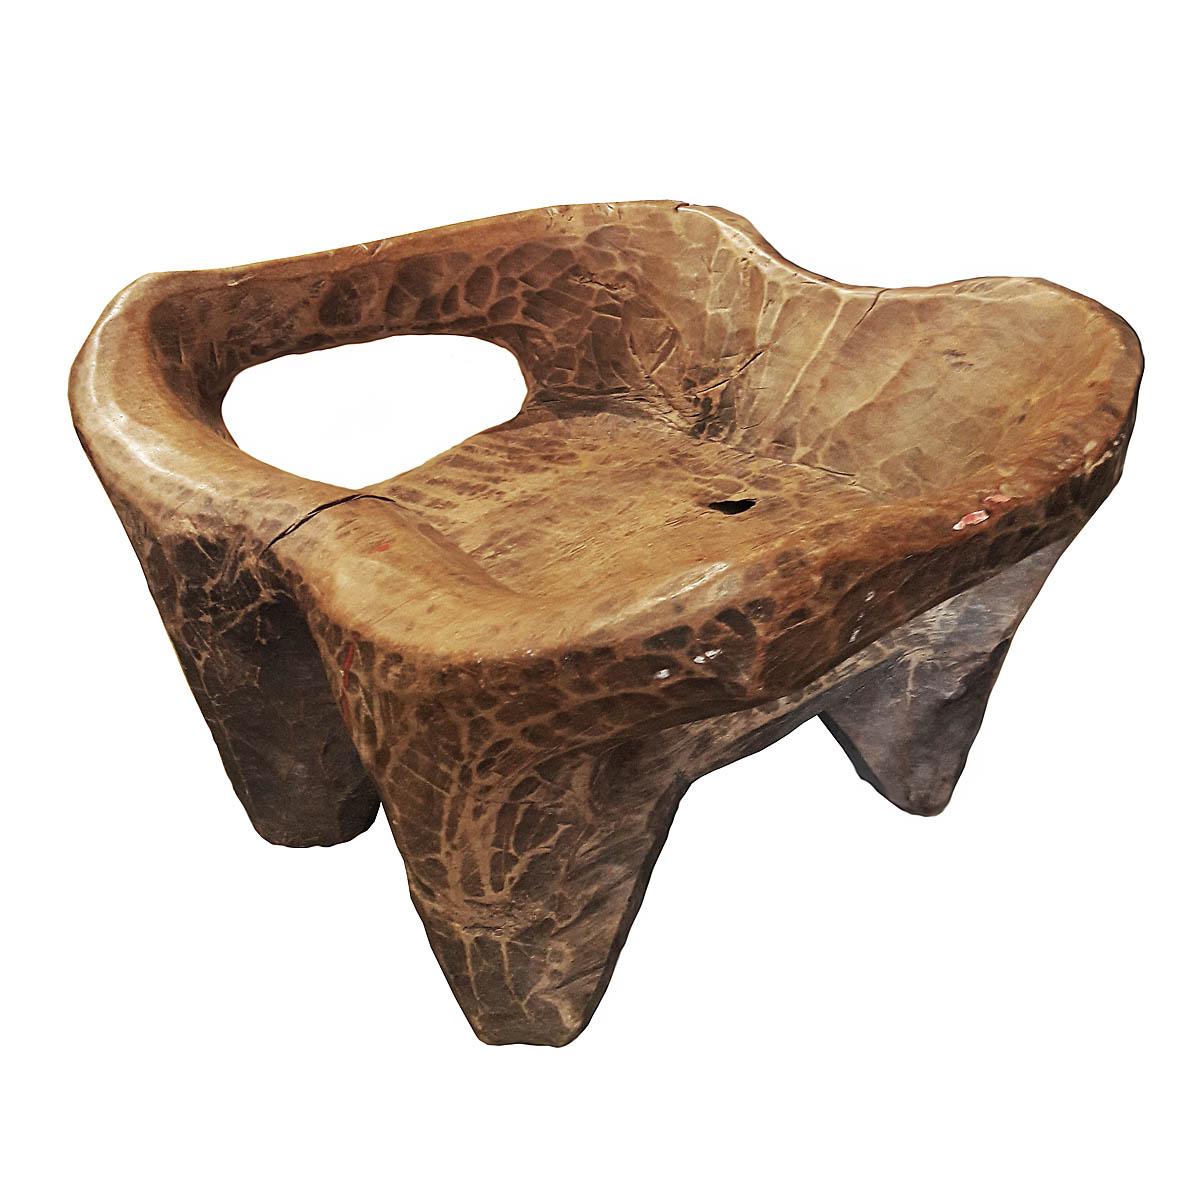 Hand-Carved Teak Stool, Low Table or Stand with Curved Arms In Good Condition For Sale In New York, NY